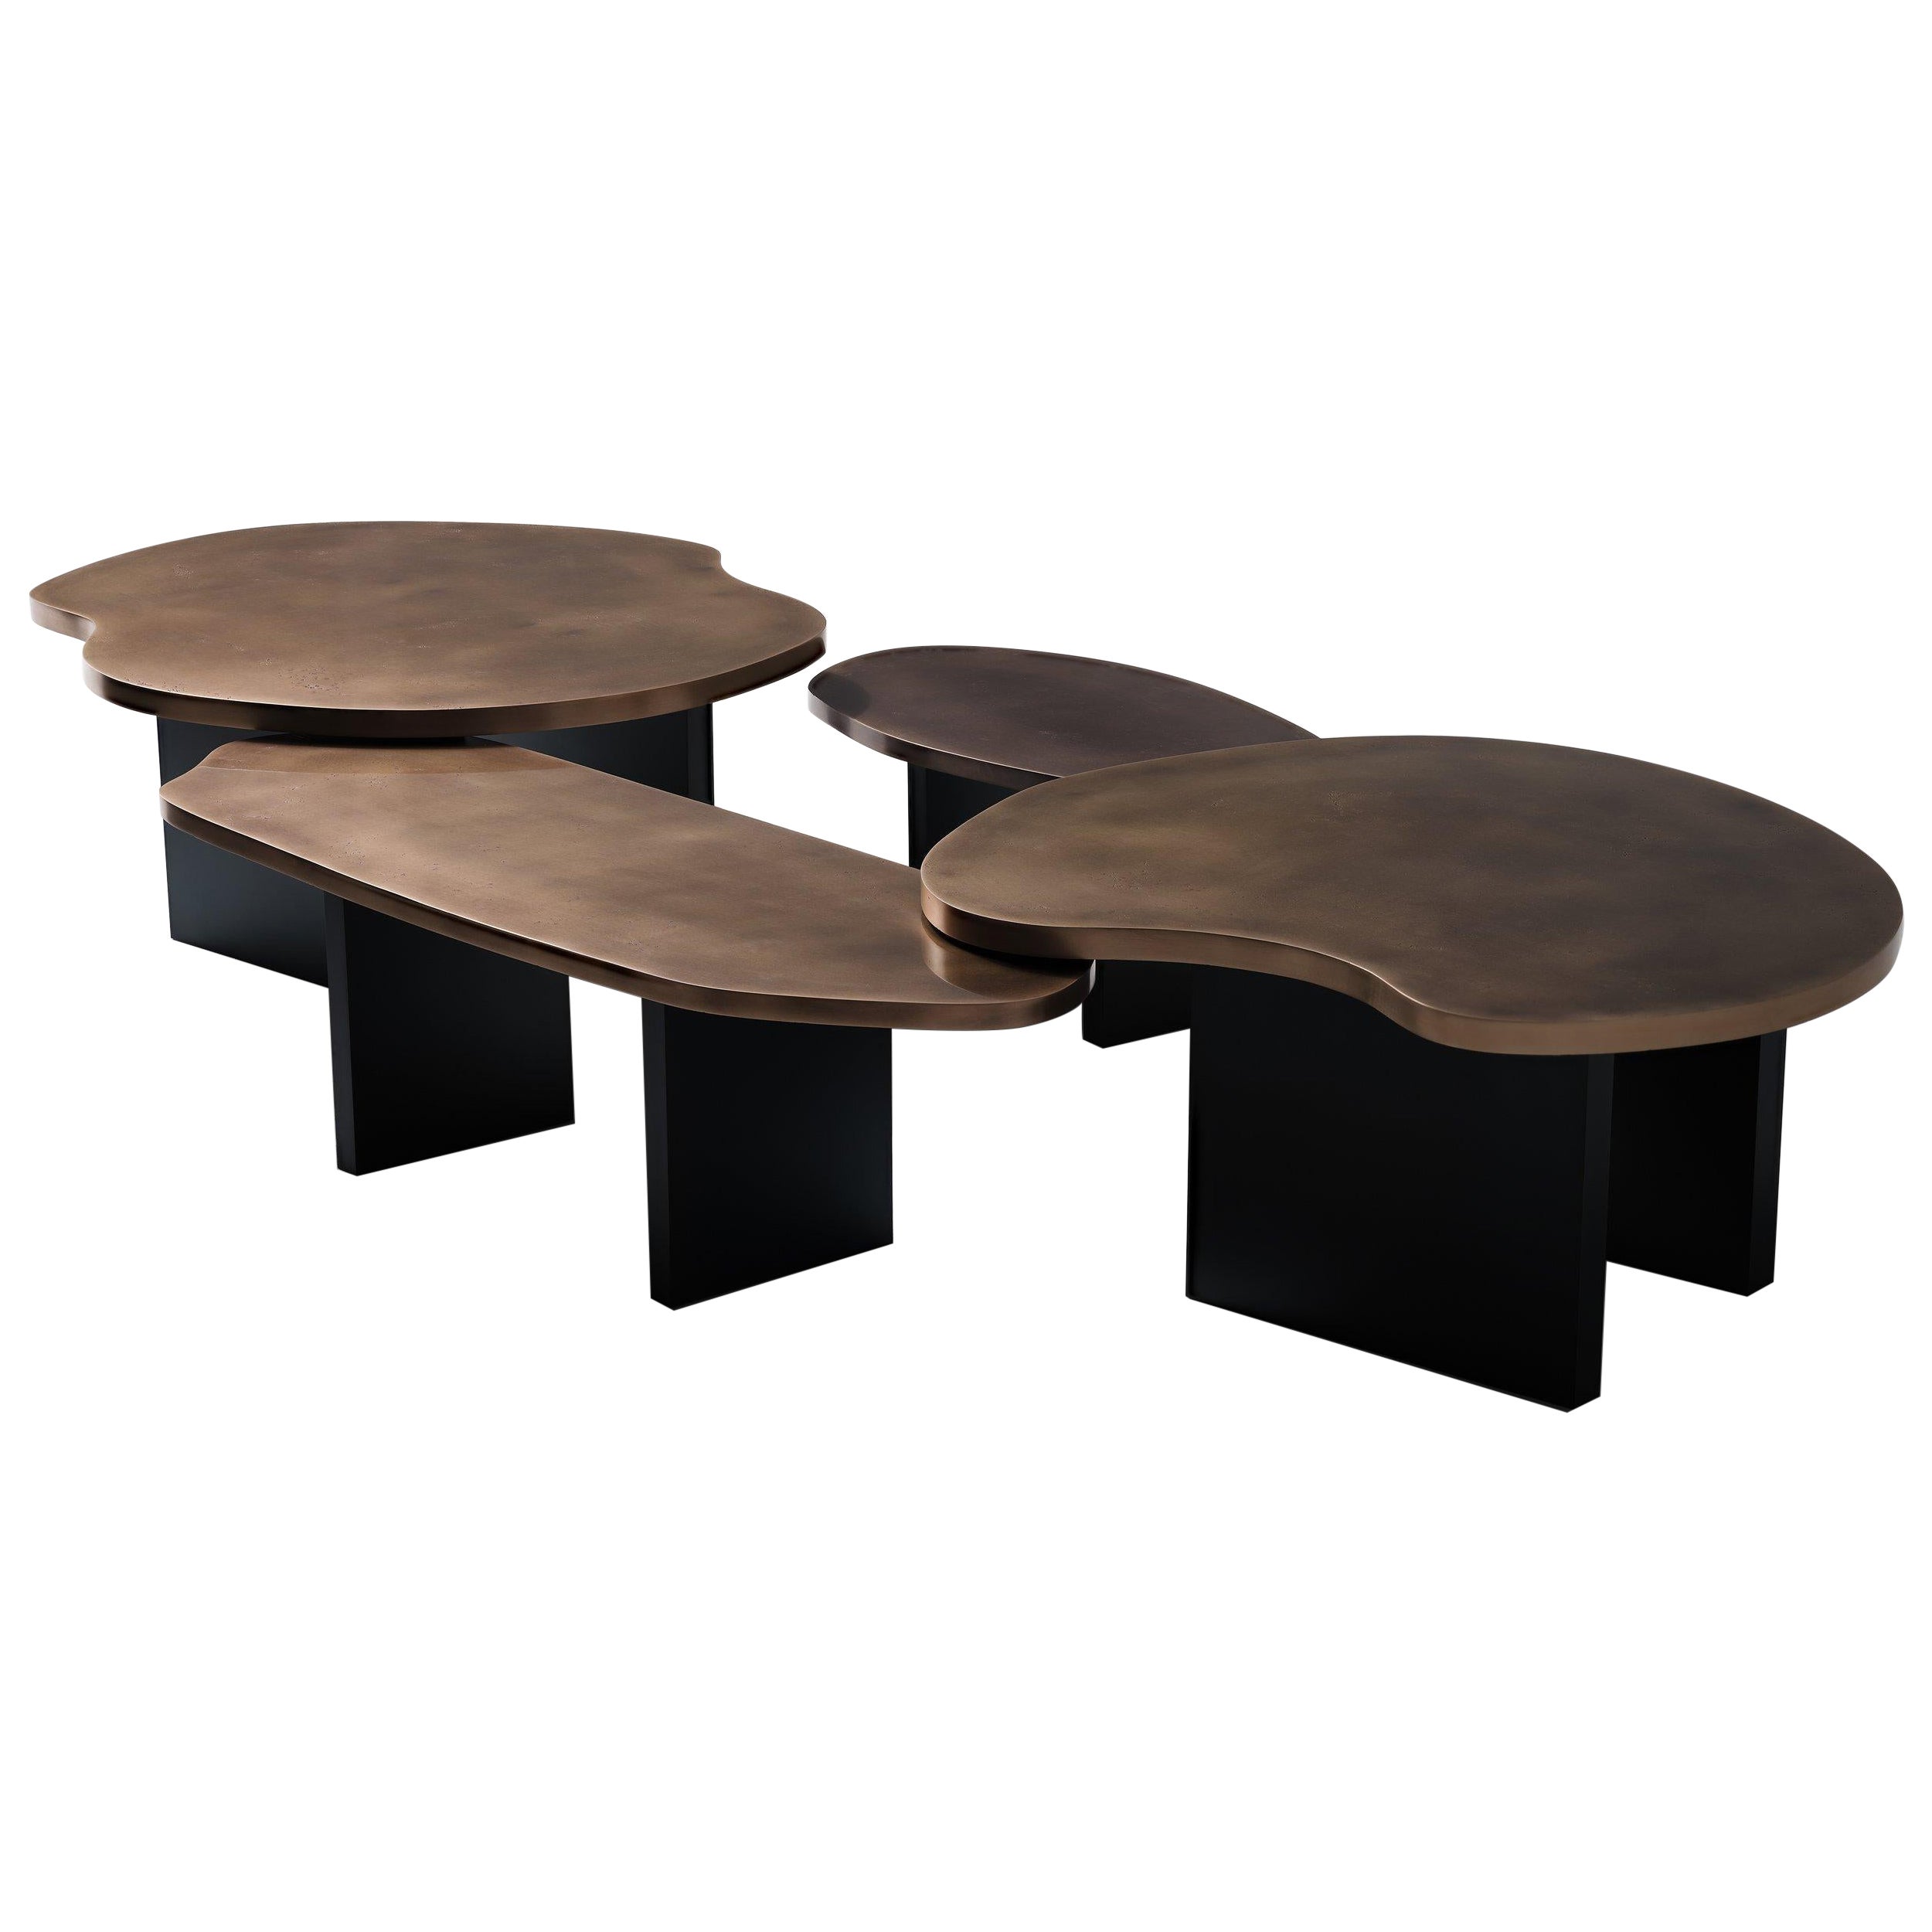 Douglas Fanning, Atoll, Bronze and Steel Nesting Tables, United States, 2021